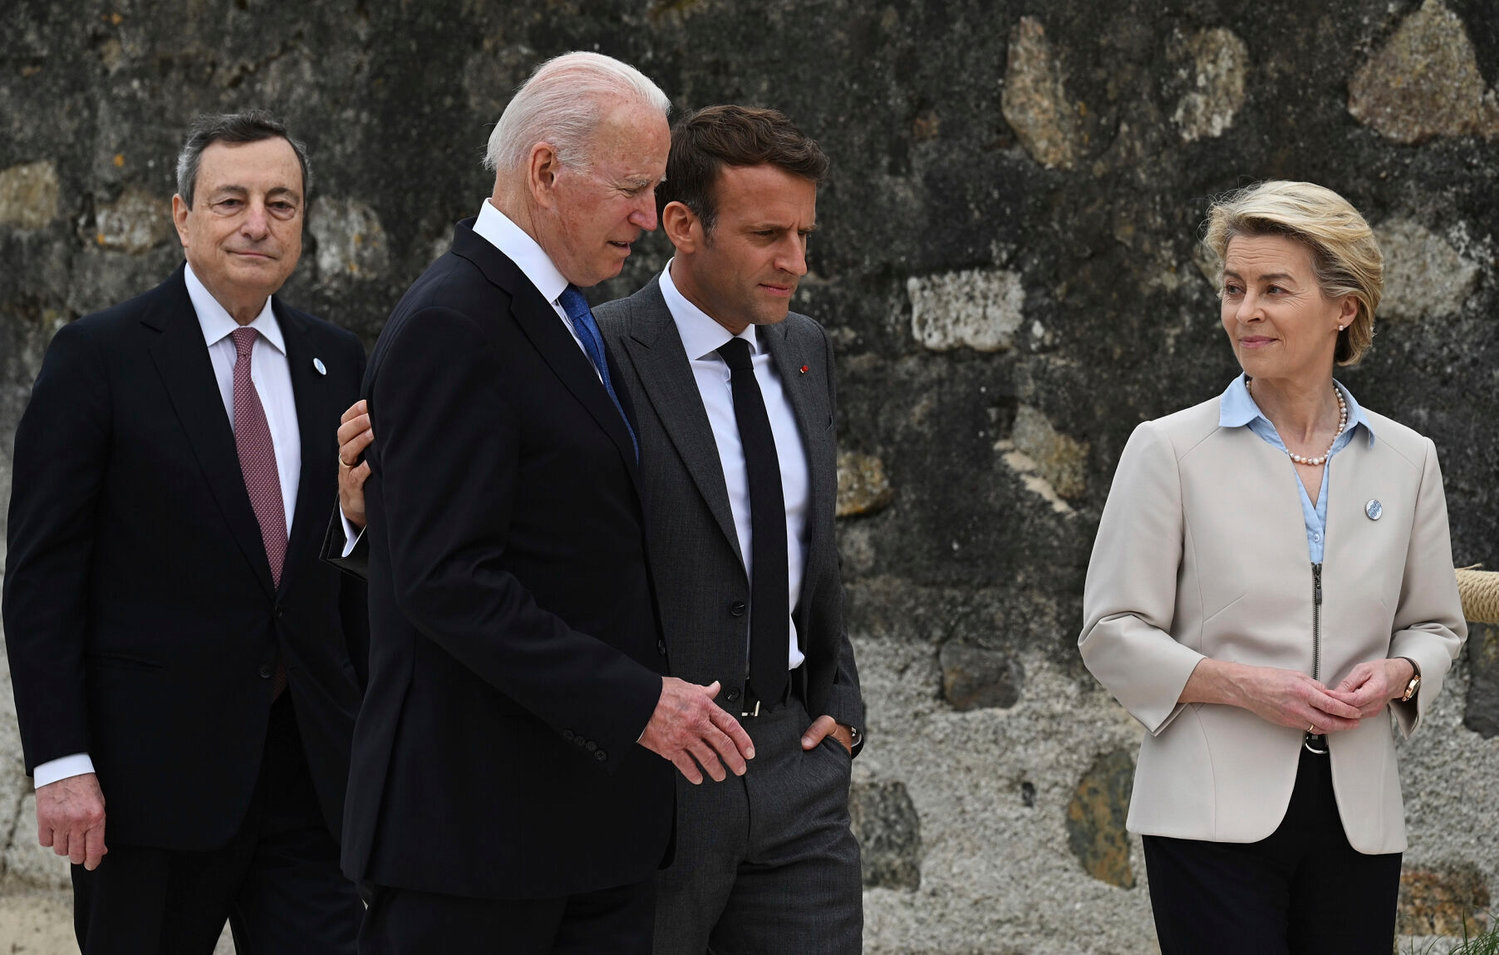 From left, Italian Prime Minister Mario Draghi, US President Joe Biden, President of France, Emmanuel Macron and European Commission Ursula von der Leyen speak after posing for photos for the Leaders official welcome and group photo session, during the G7 Summit, in Carbis Bay, Cornwall, England, Friday, June 11, 2021.